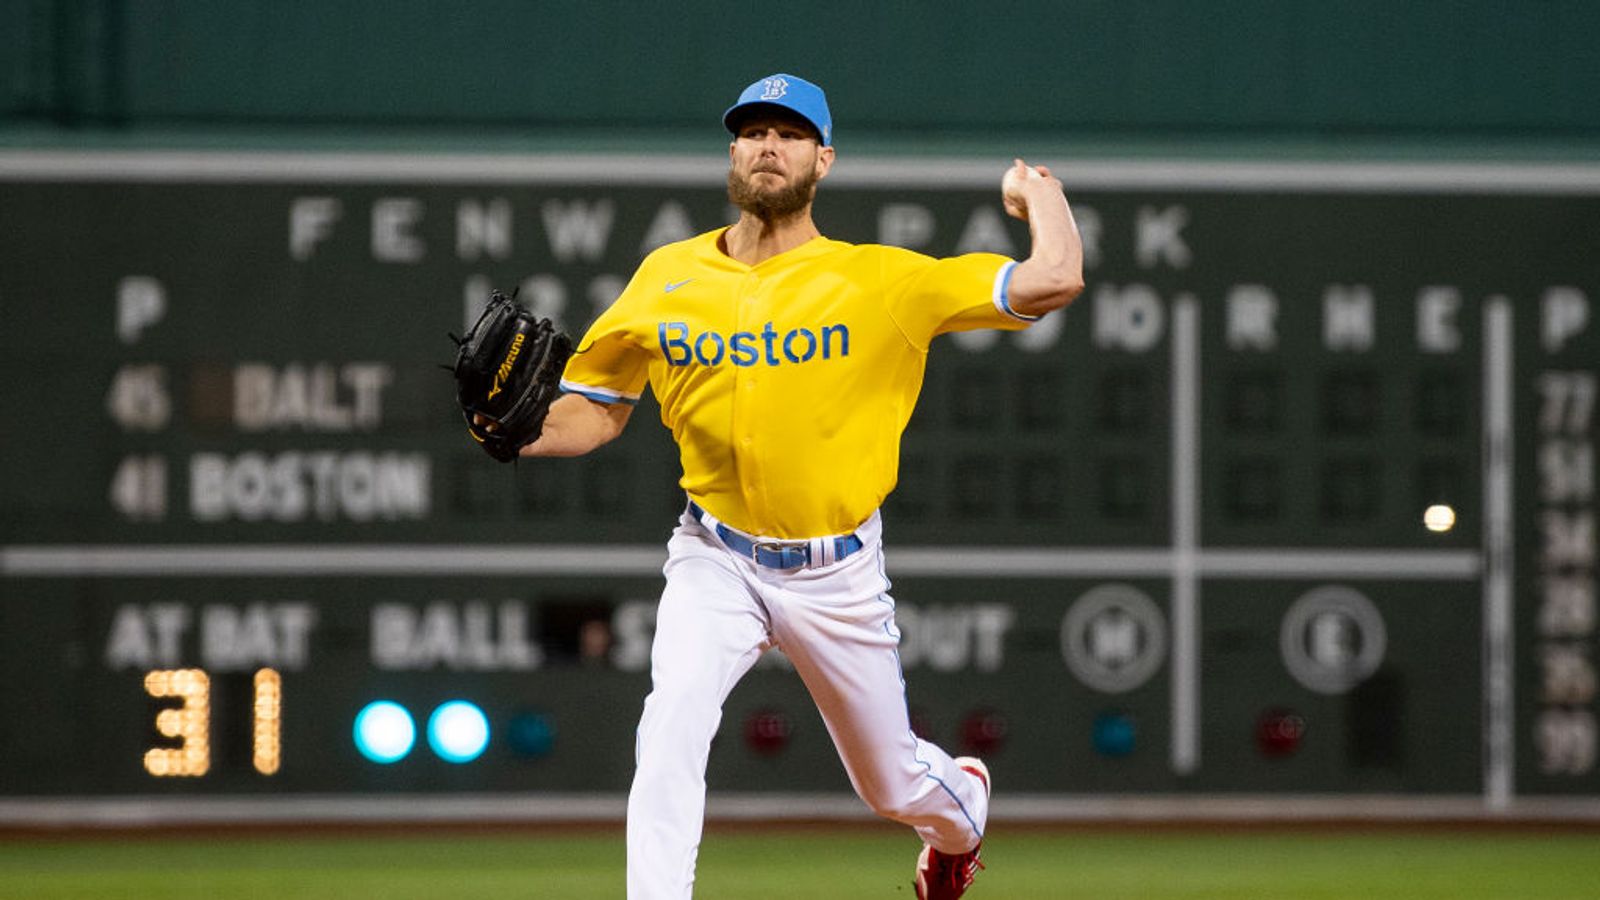 Red Sox pitchers combine for Fenway Park shutout over Royals